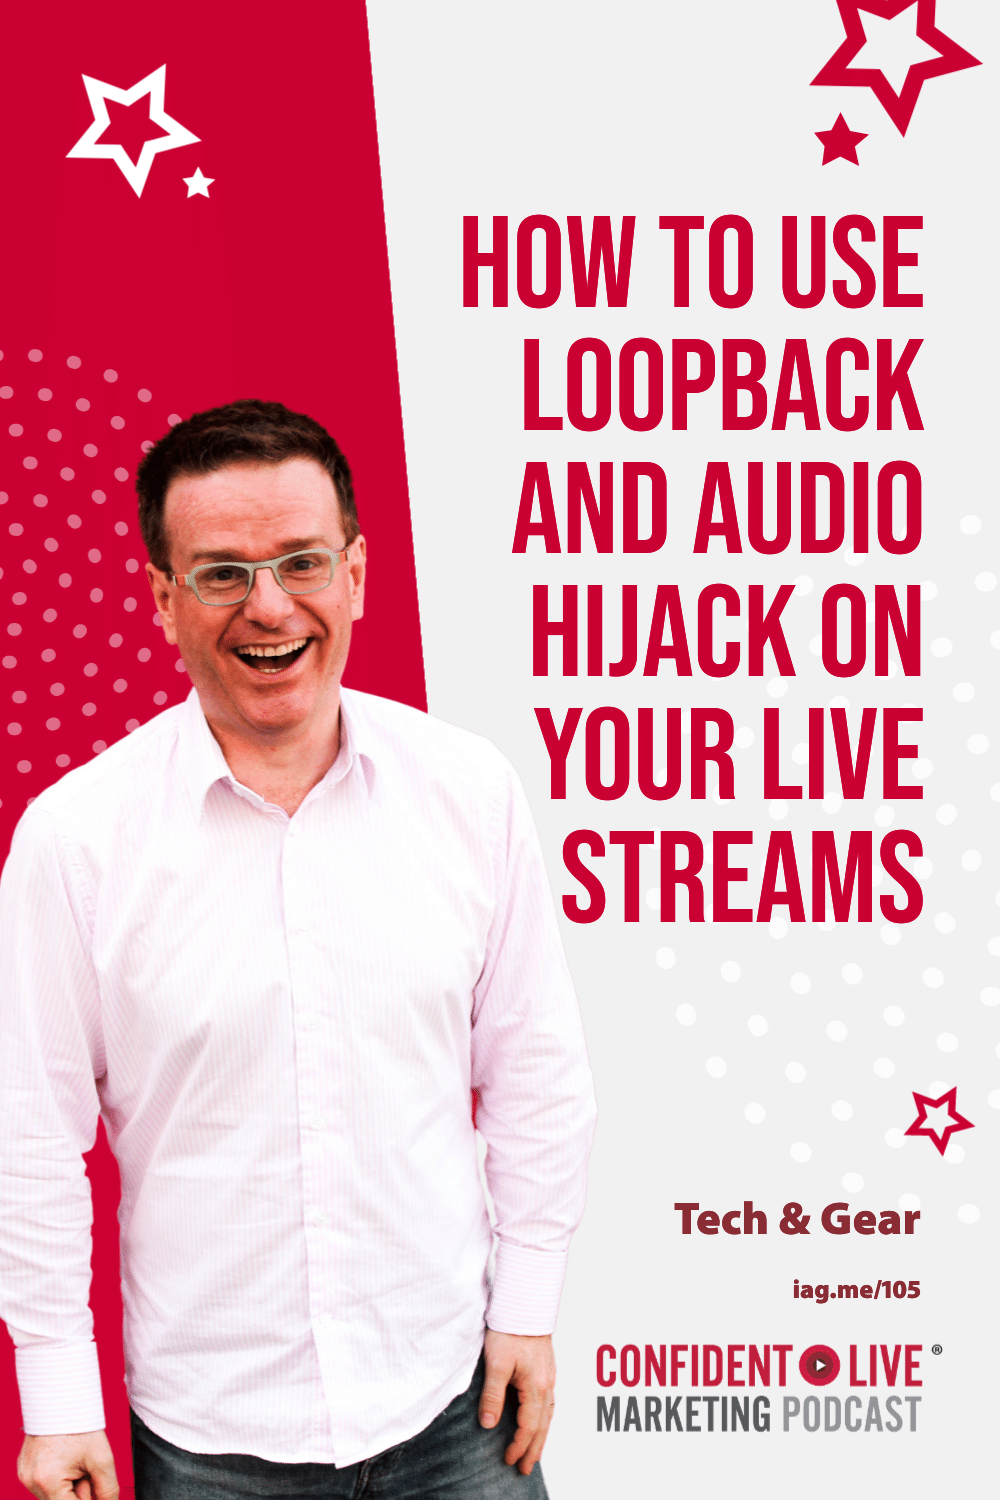 How to use Loopback and Audio Hijack on Your Live Streams